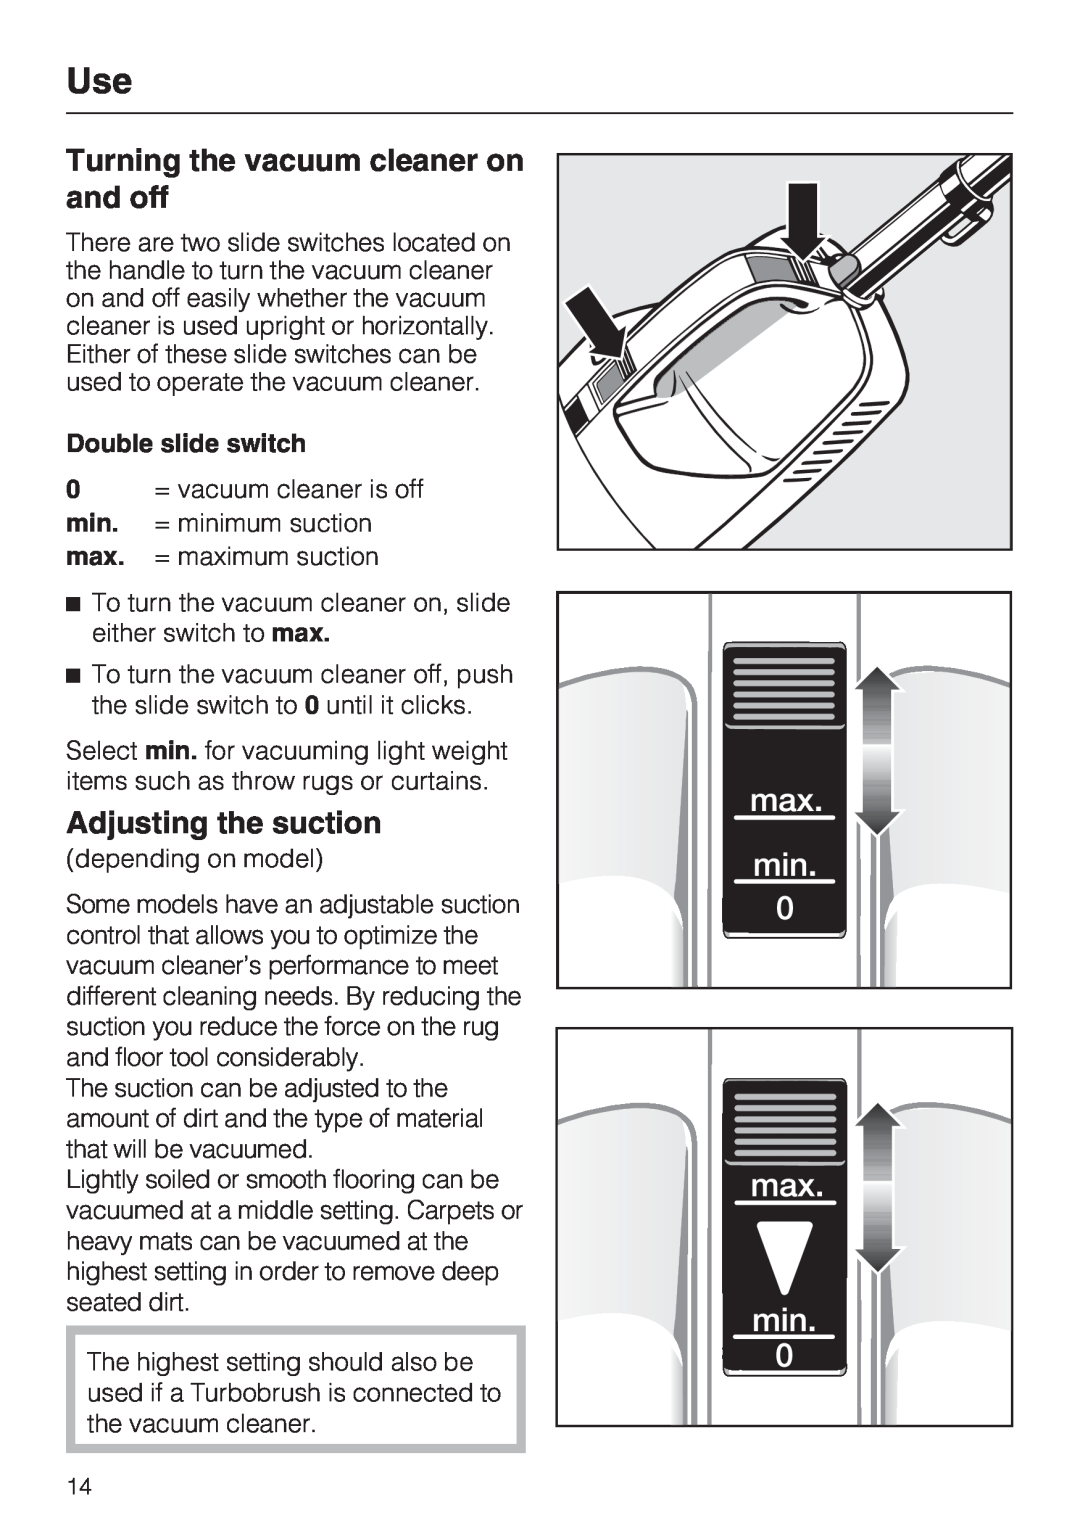 Miele S 190 operating instructions Turning the vacuum cleaner on and off, Adjusting the suction, Double slide switch 